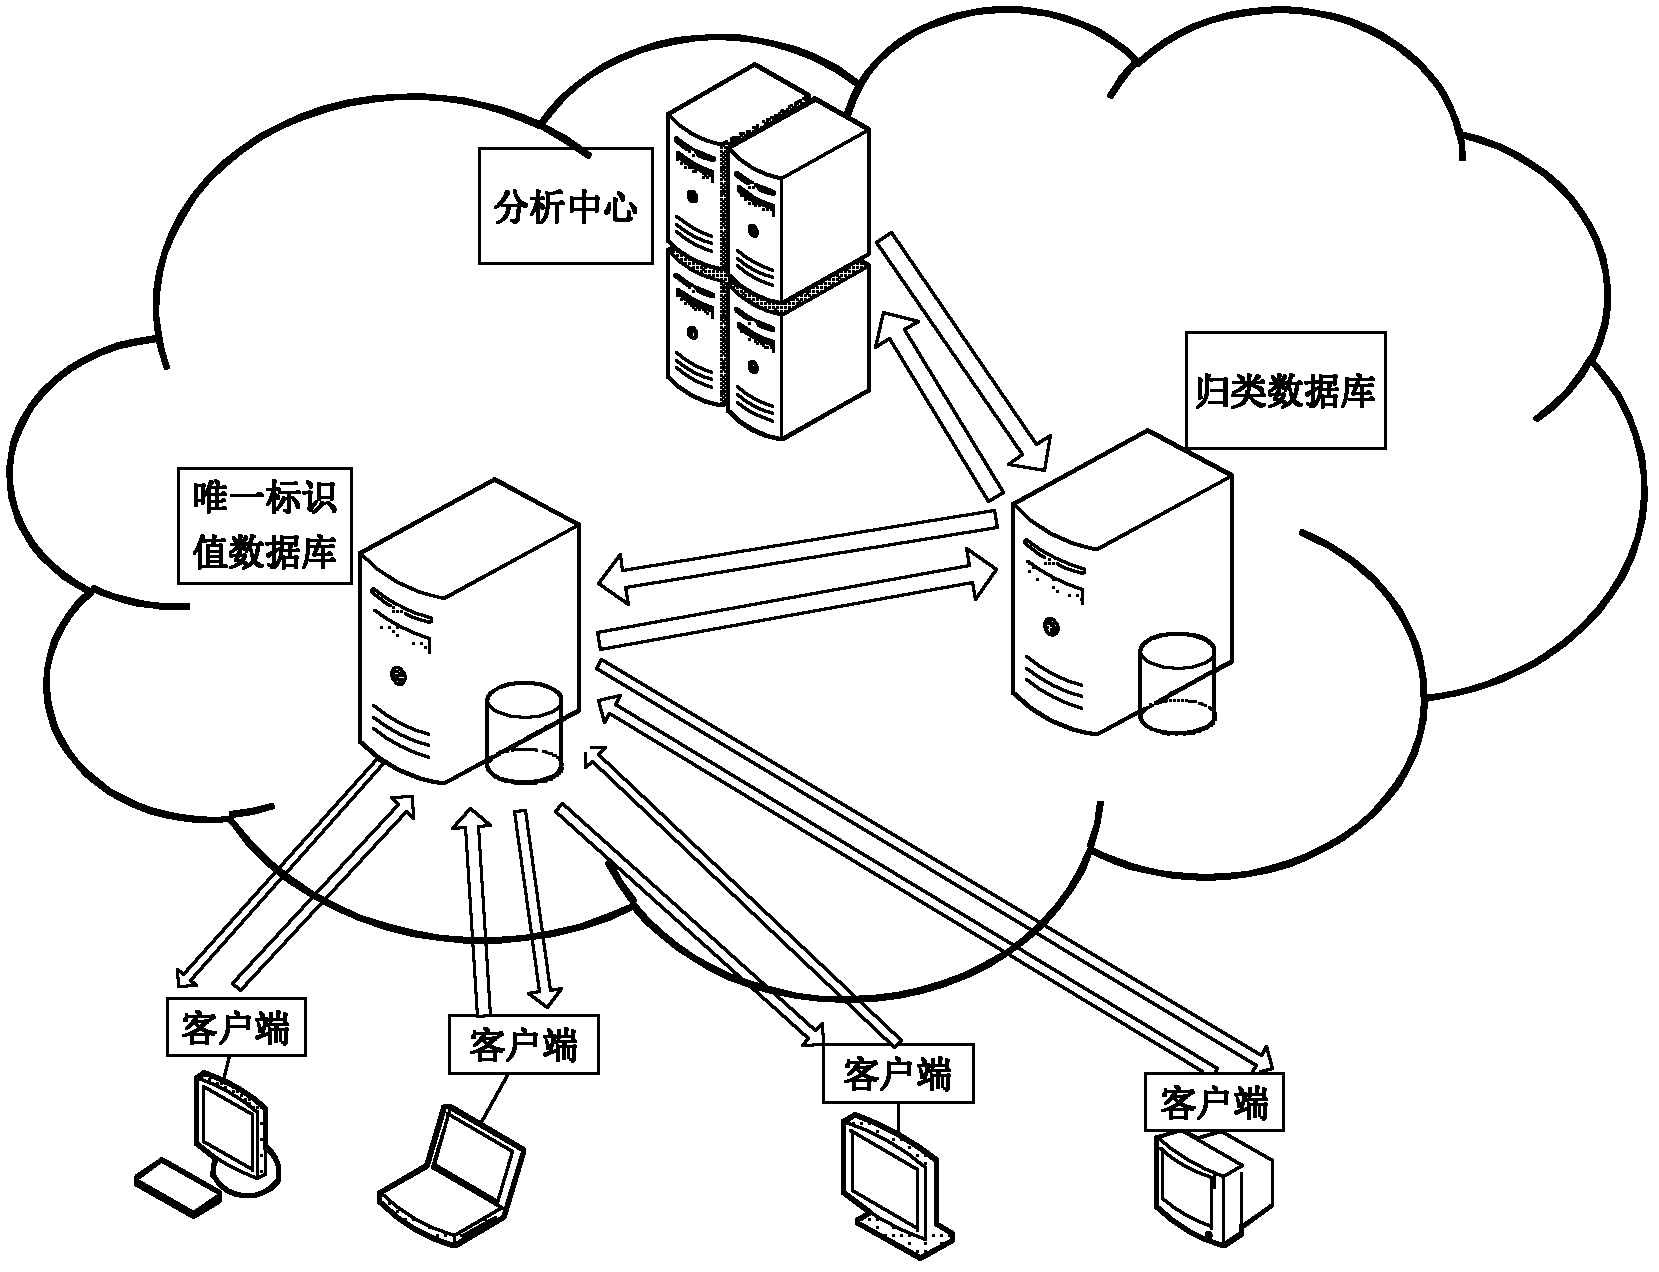 Malicious code type detection method based on cloud mode